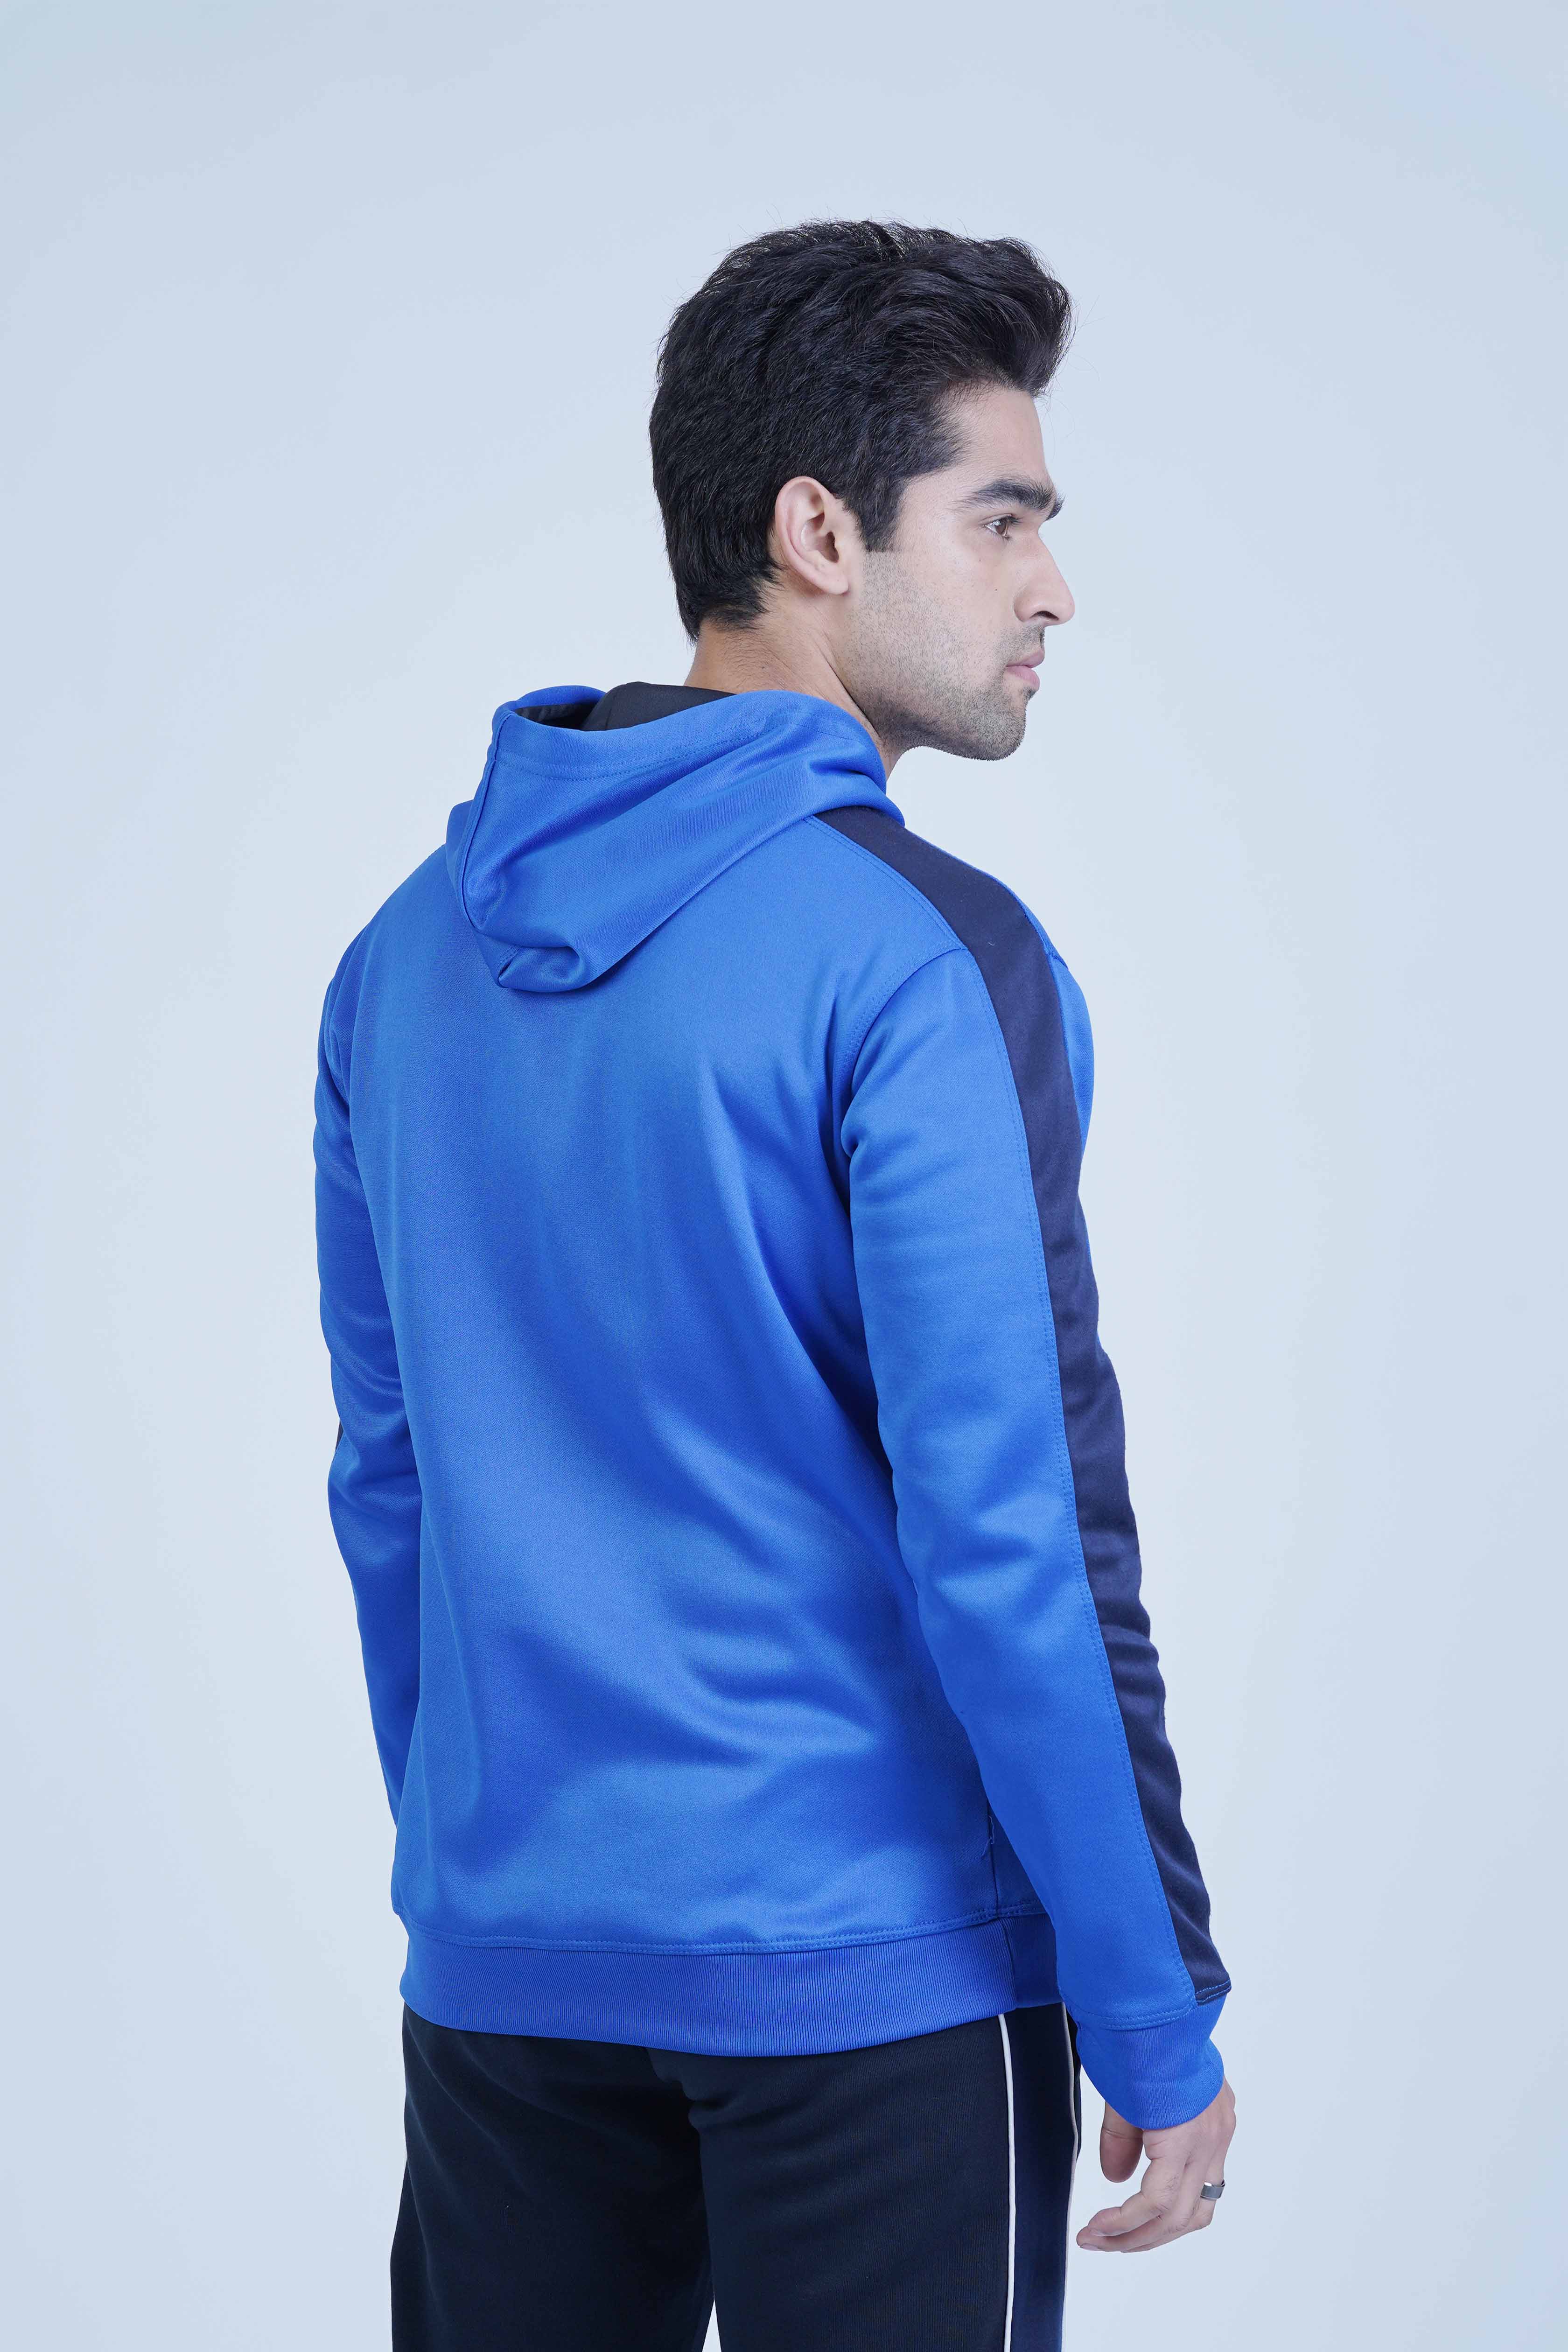 Positive Royal Blue Navy Hoodie from The Xea Collection